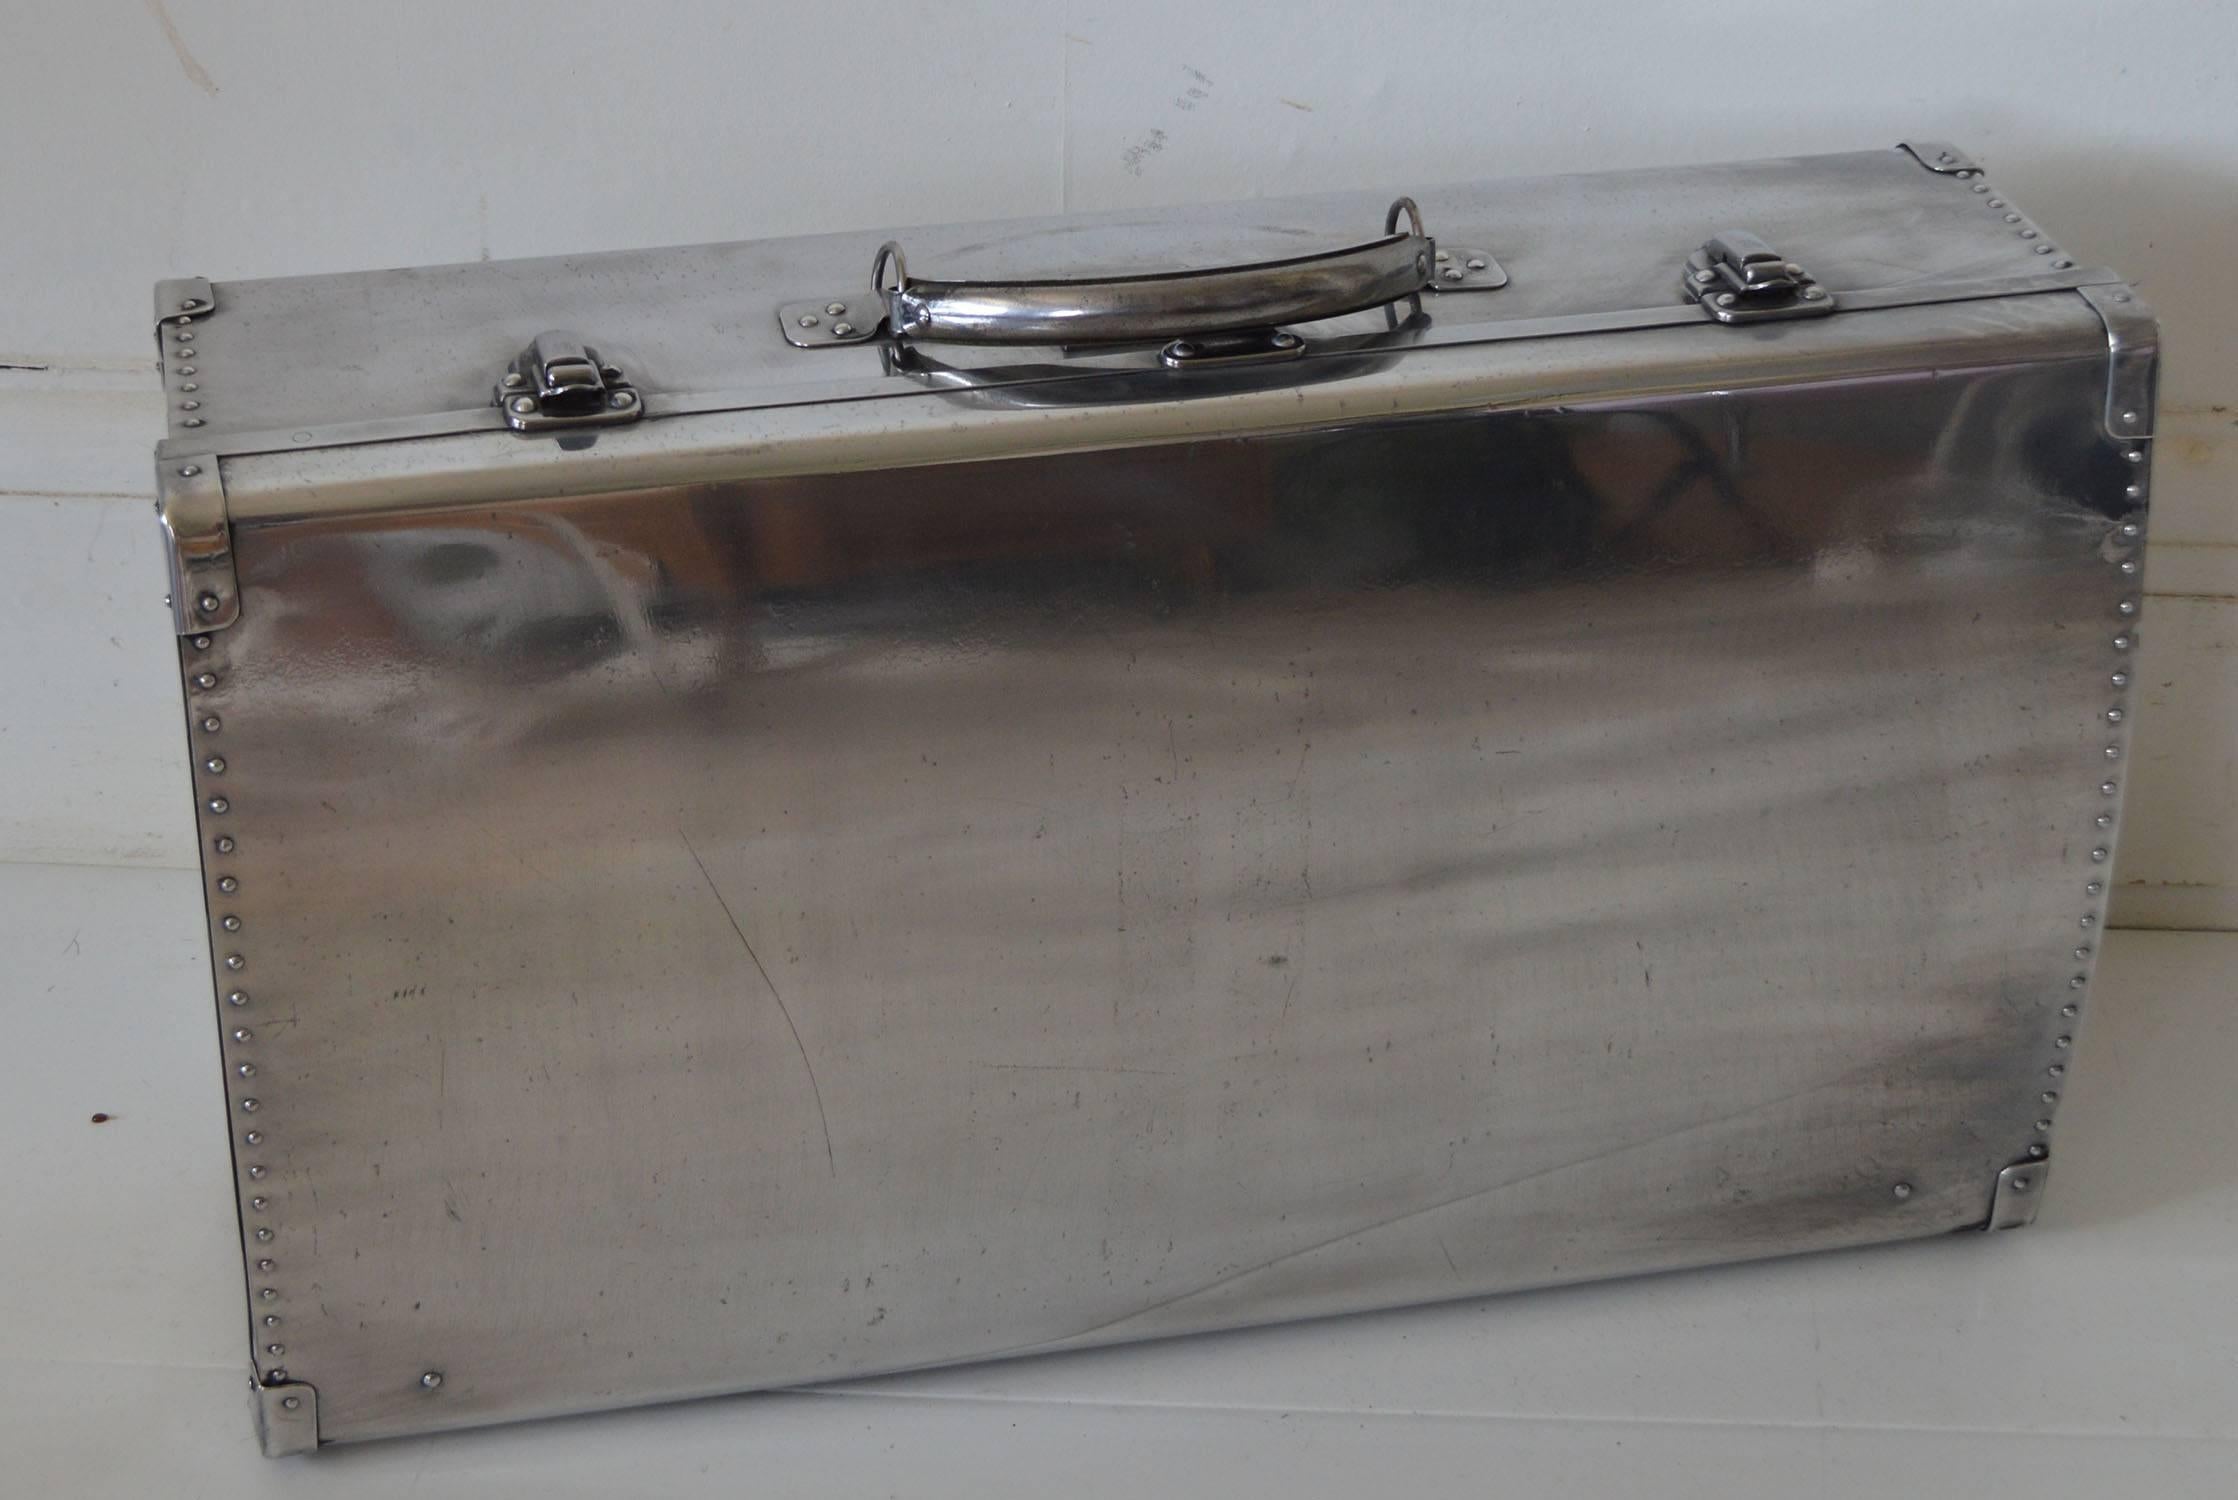 Super polished aluminium suitcase made by the Heston Aircraft Co. London, England, 1940s.

Interesting shape with a curved top and bottom. 

They were made from the surplus aluminium after the war.

Functional with clean interior. Very light.